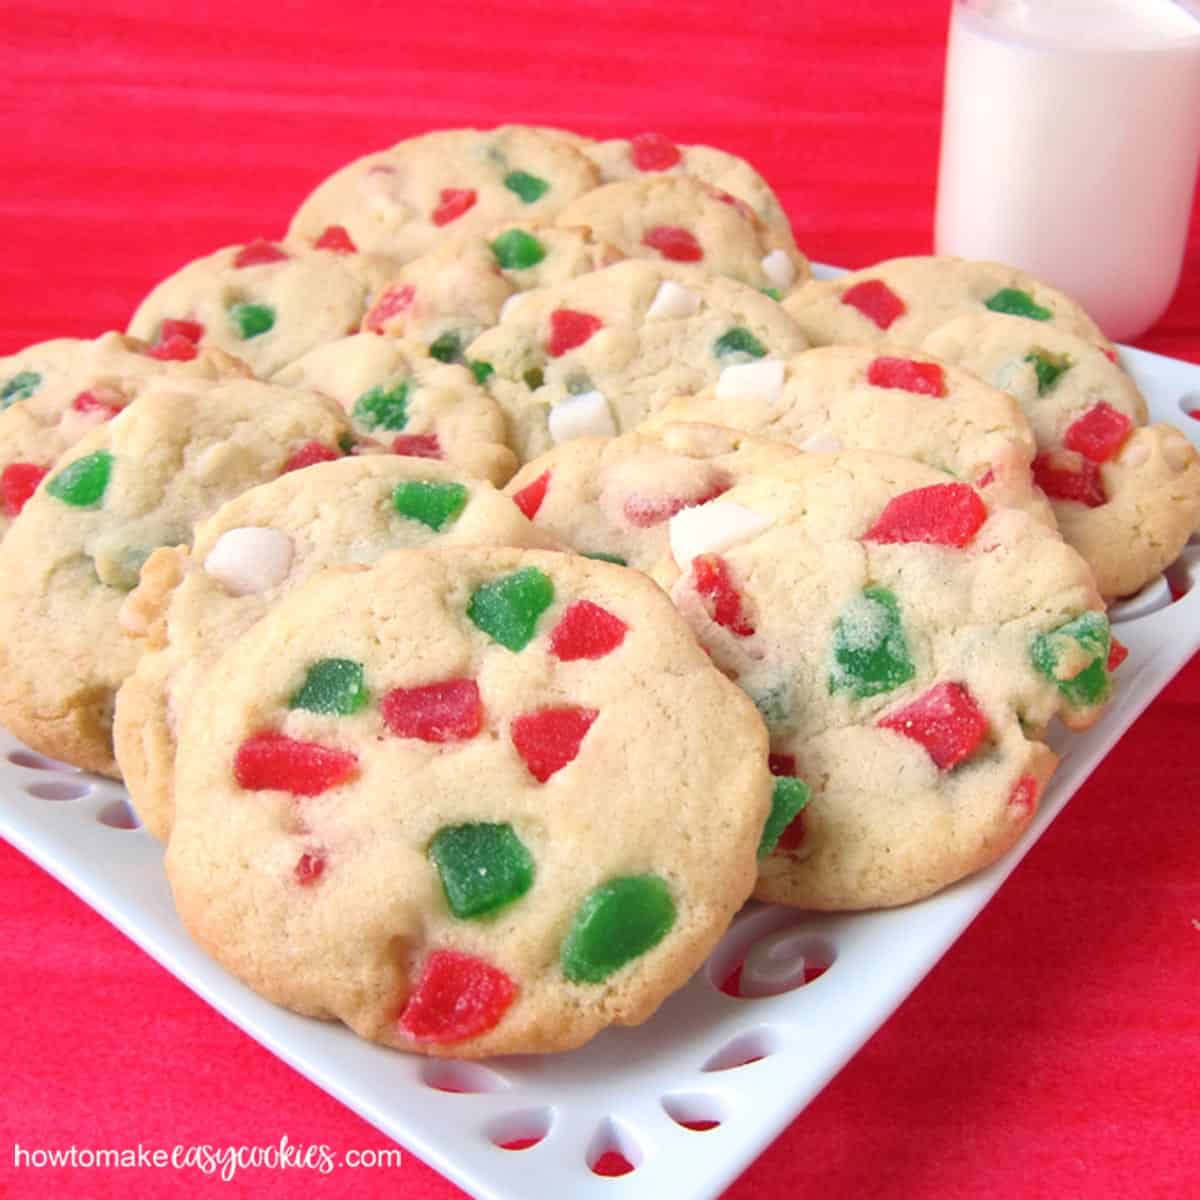 Red, white, and green gumdrop filled sugar cookies.